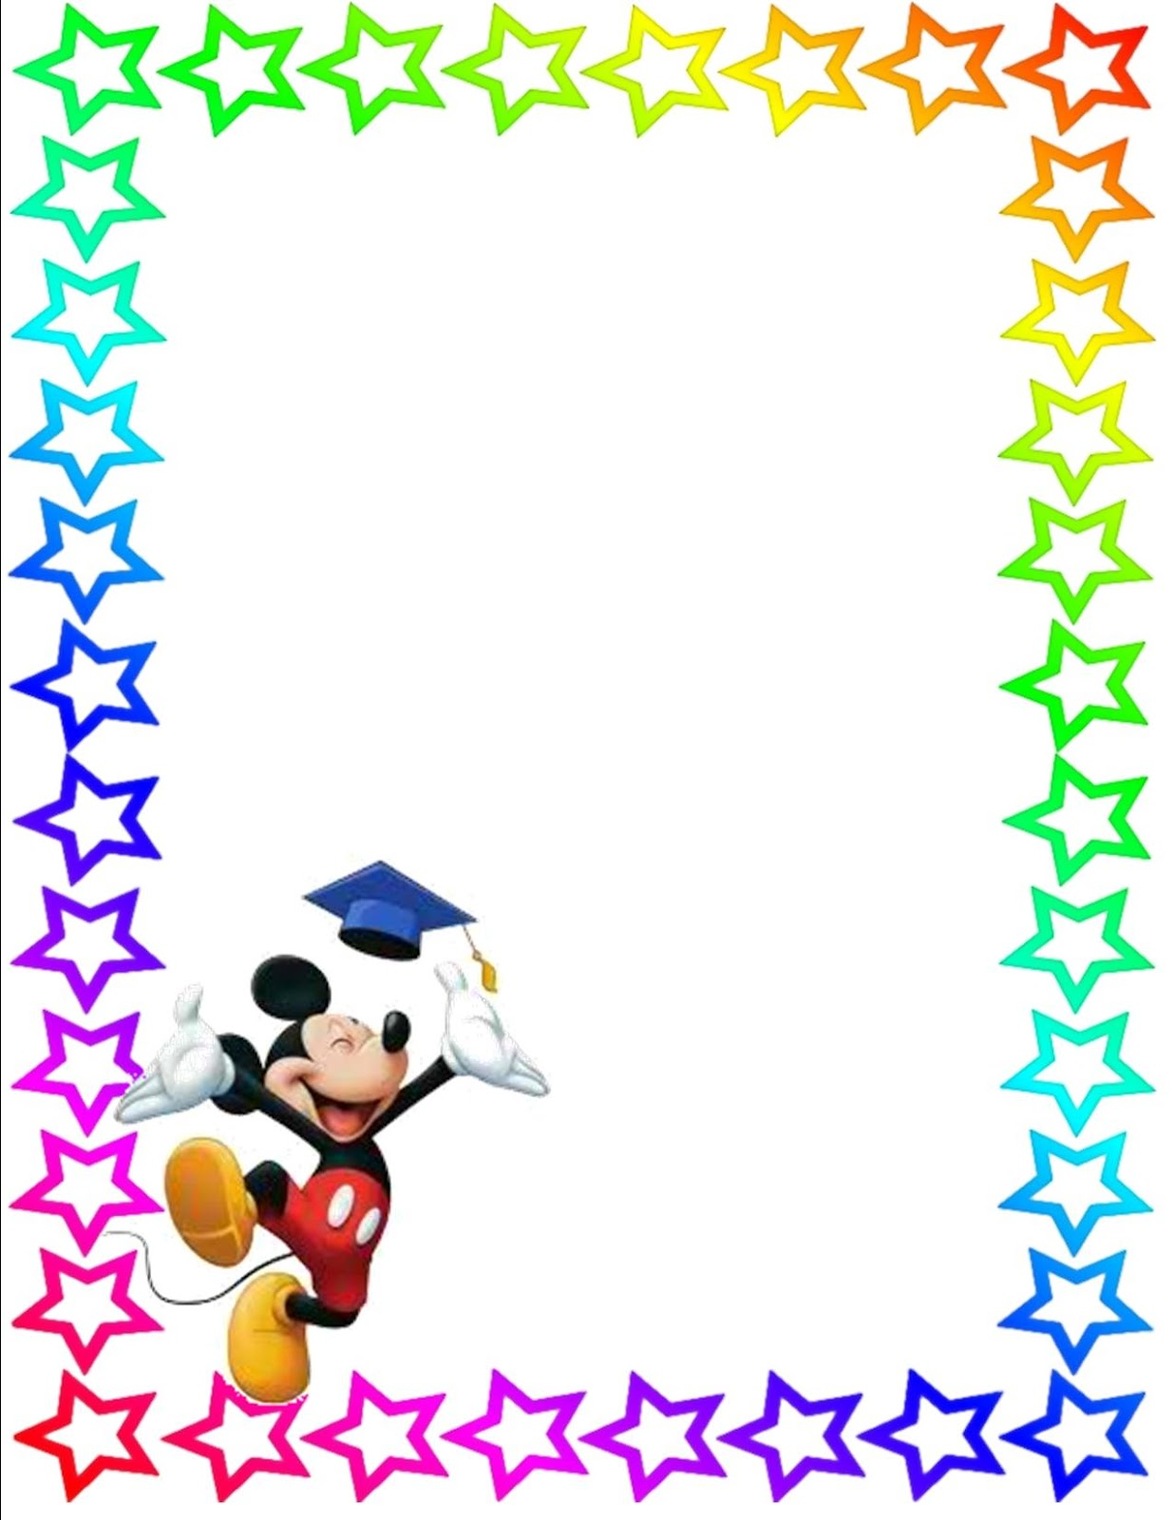 Graduation Borders Clipart - Free to use Clip Art Resource